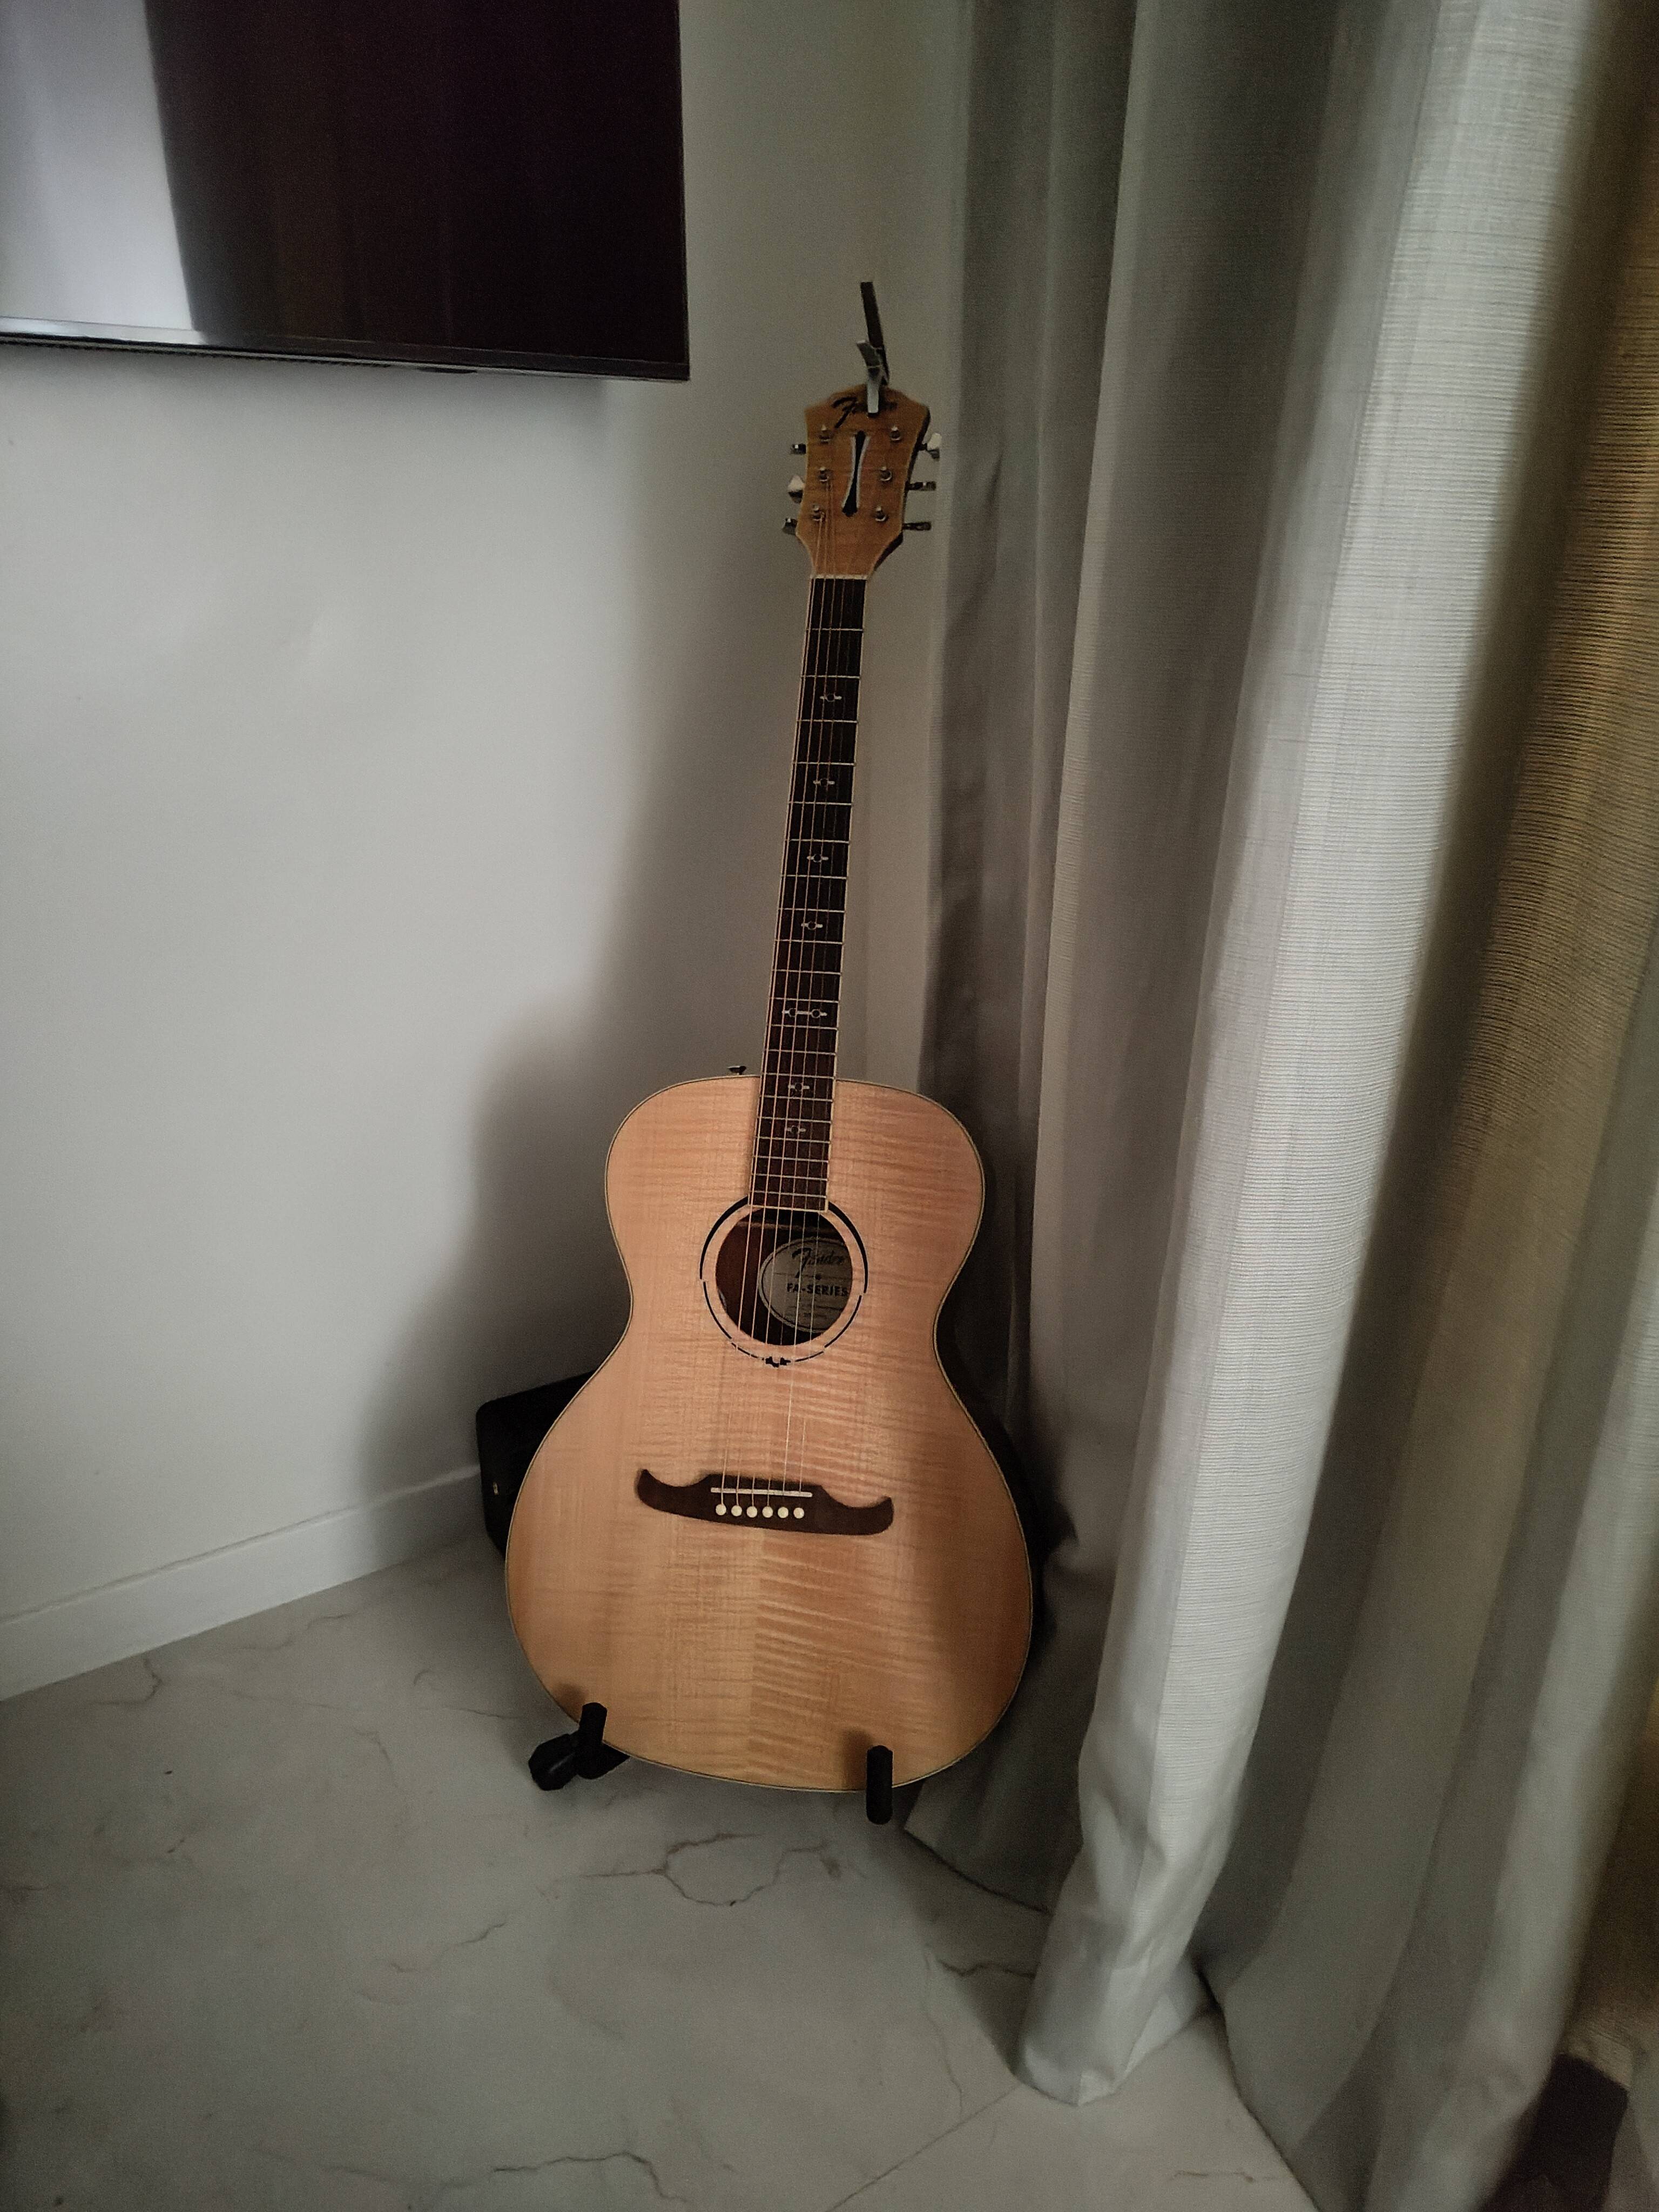 an image of a guitar placed in a dimly lit room